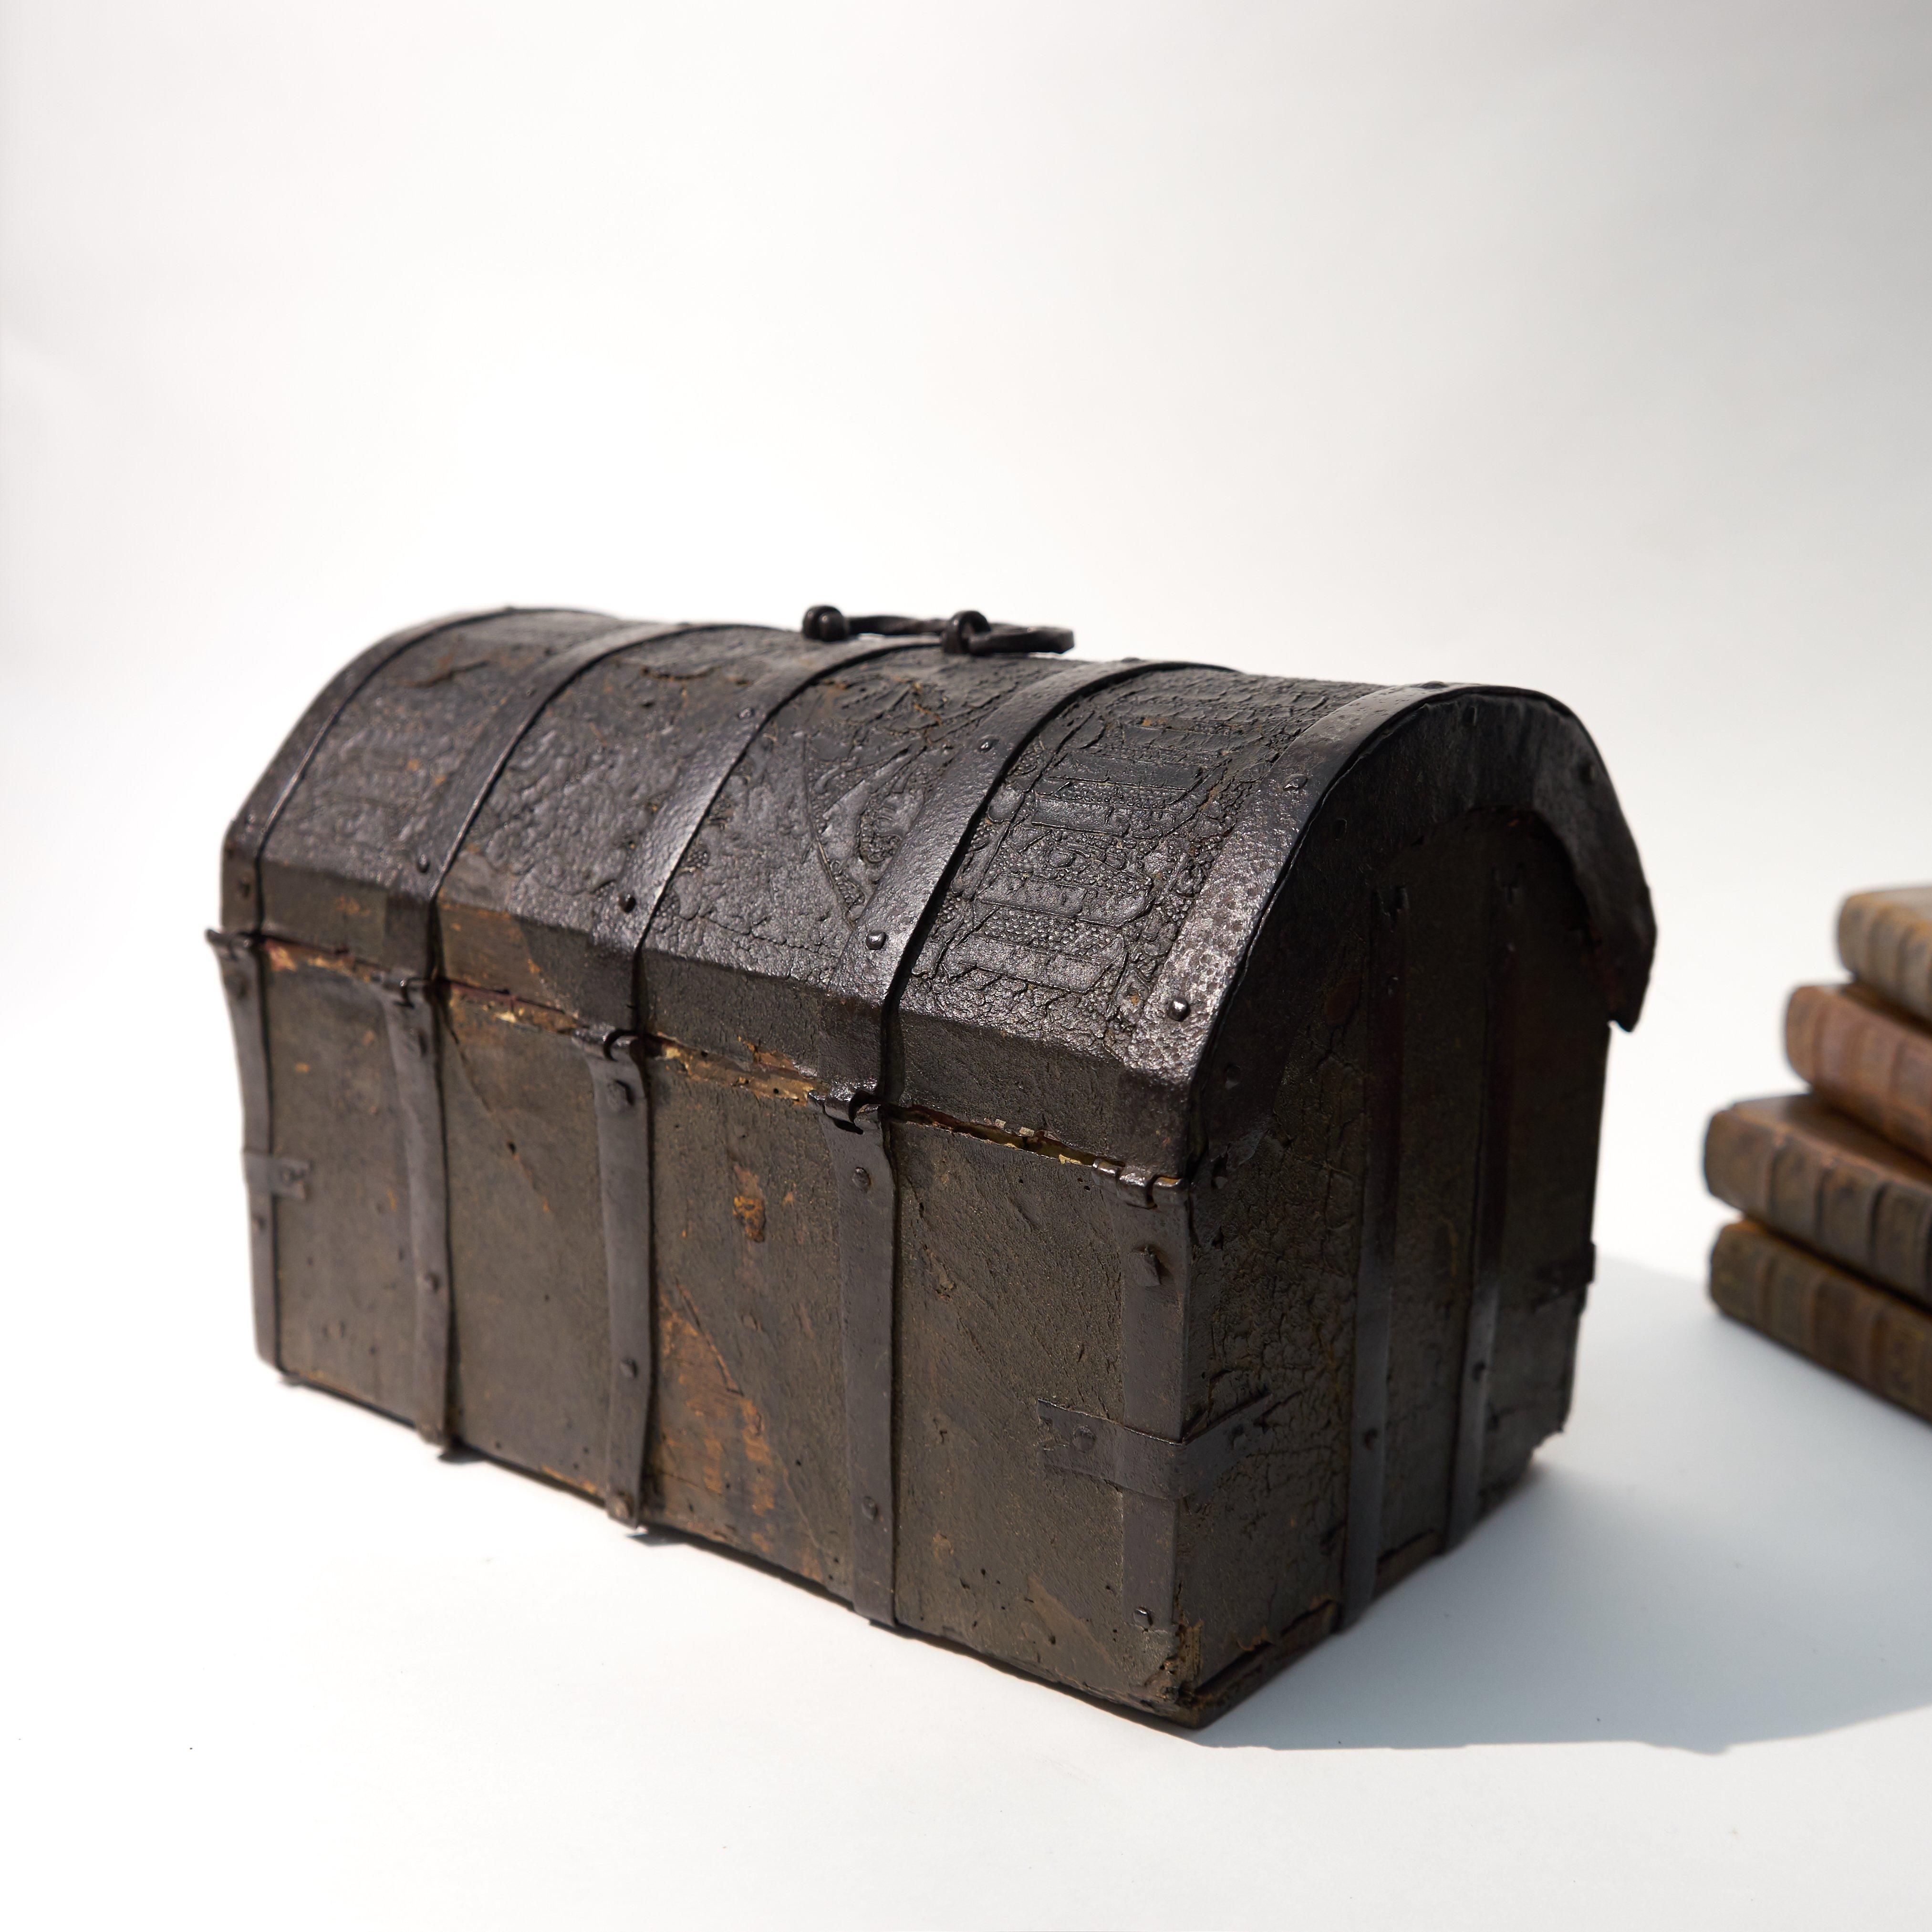 The box is an iron-mounted Cuir Bouilli casket.
Coffrets or small boxes, made from wood and covered with leather were often used to store
documents or other desk objects. It is decorated with floral patterns and includes three
inscriptions in